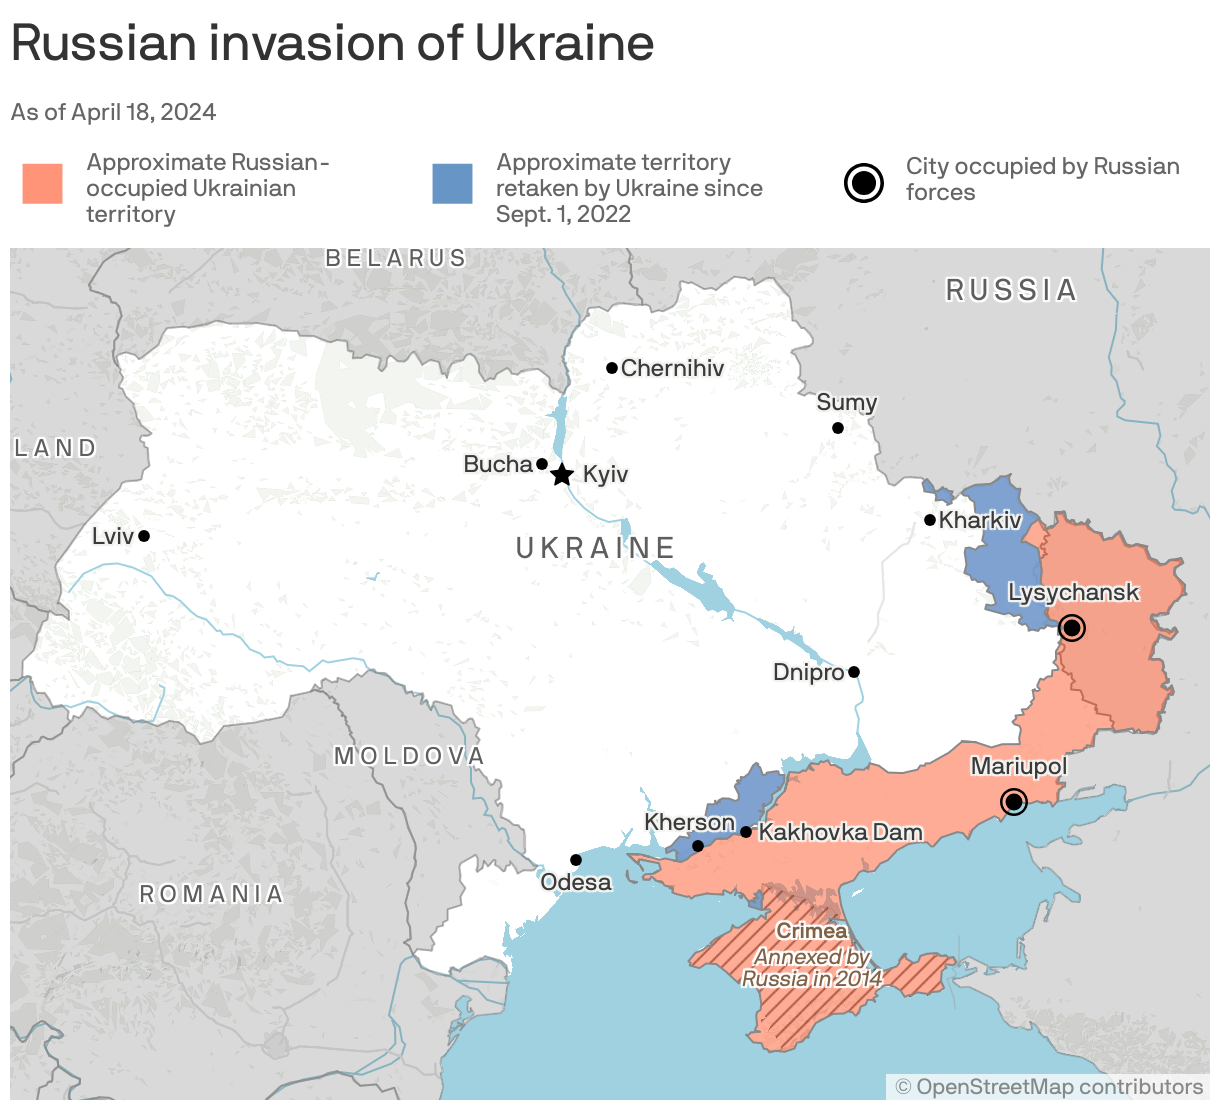 Russian invasion of Ukraine, as of March 17